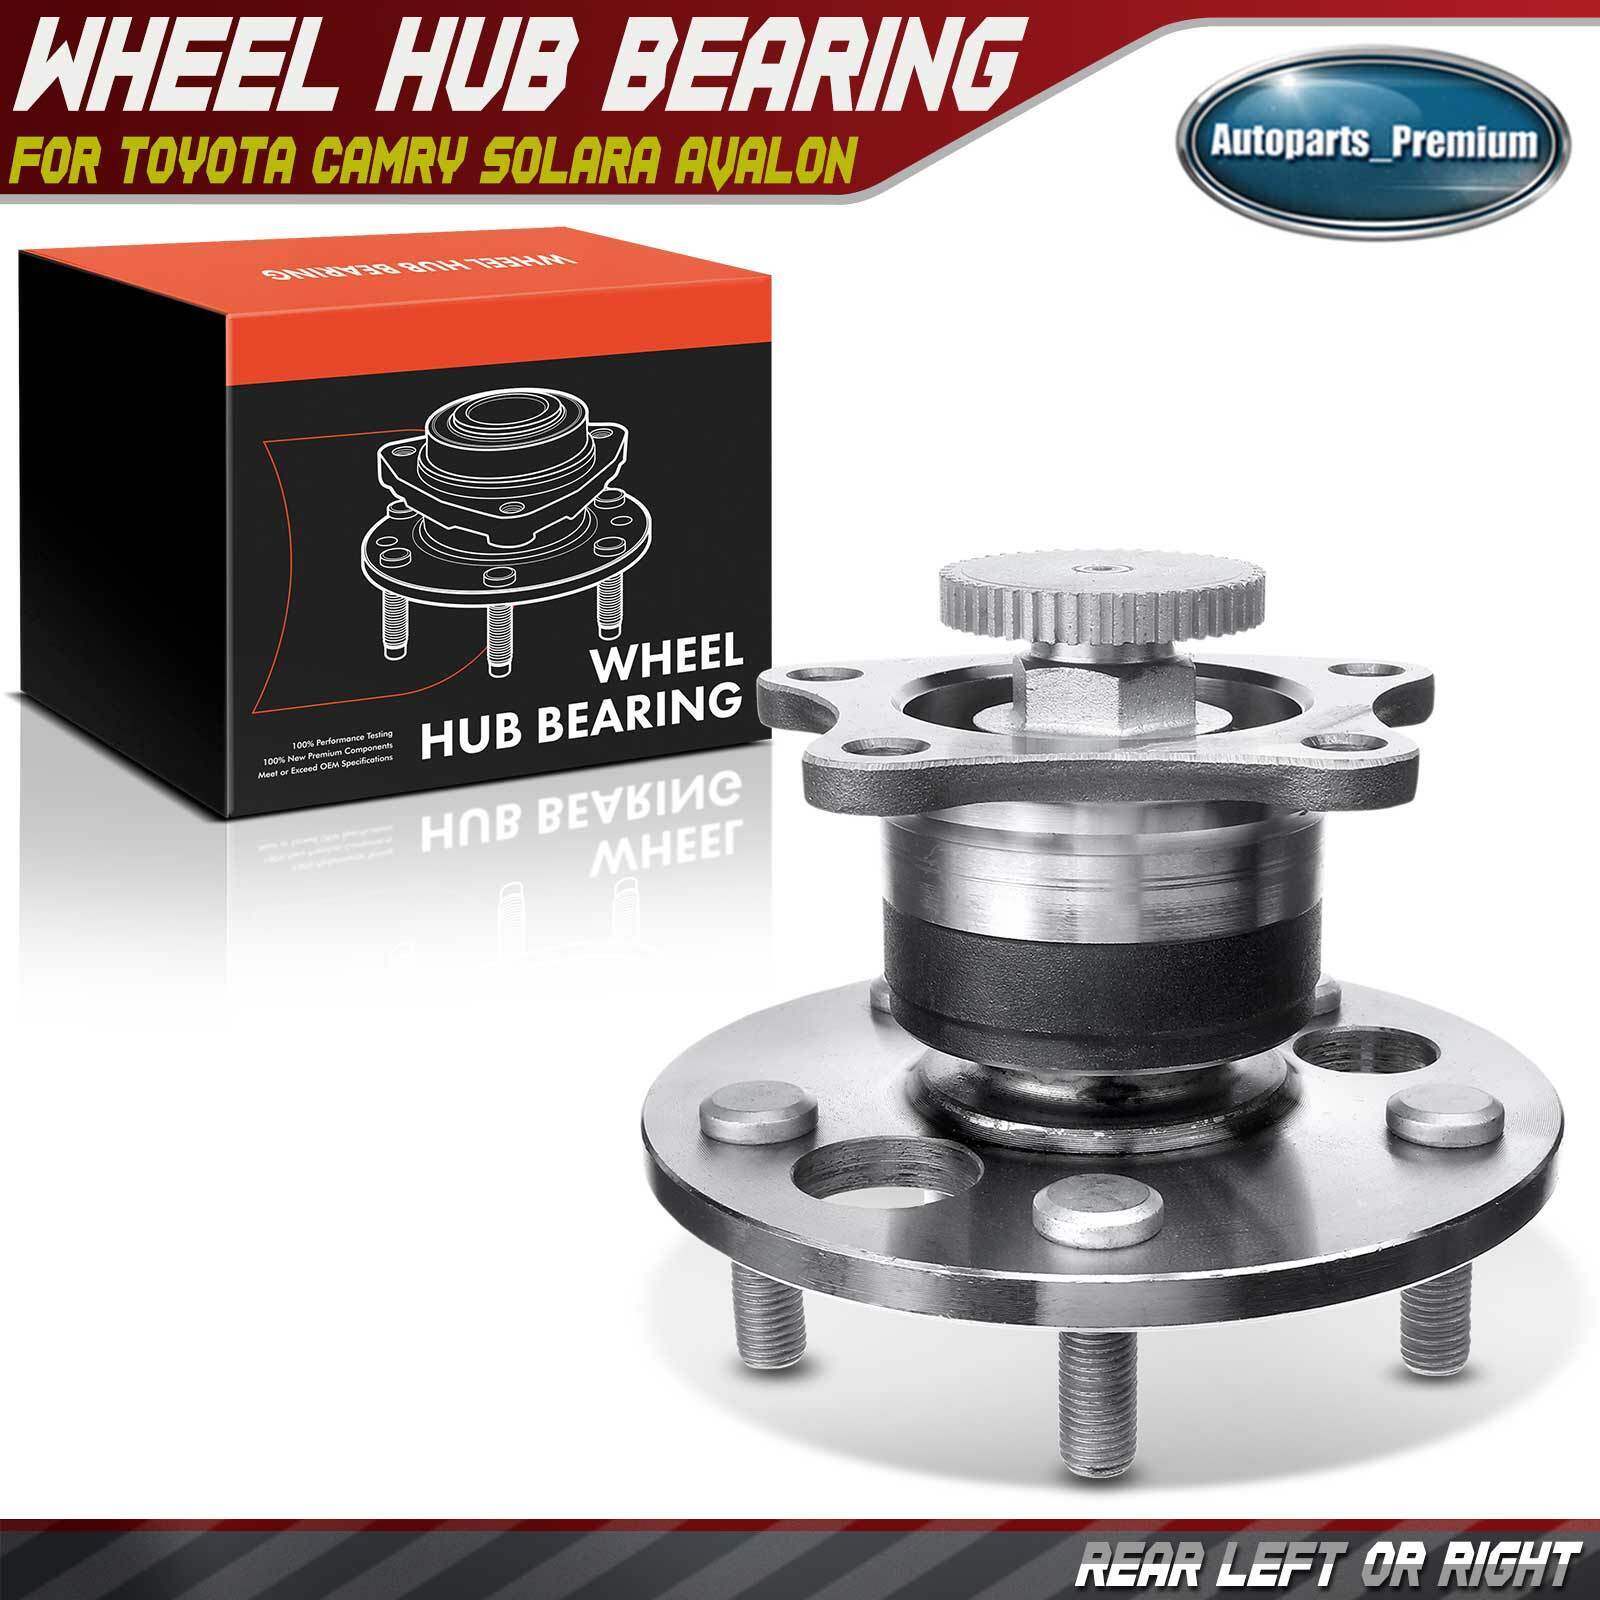 Rear L / R Wheel Bearing Hub Assembly for Lexus ES300 RX300 Toyota Avalon Camry